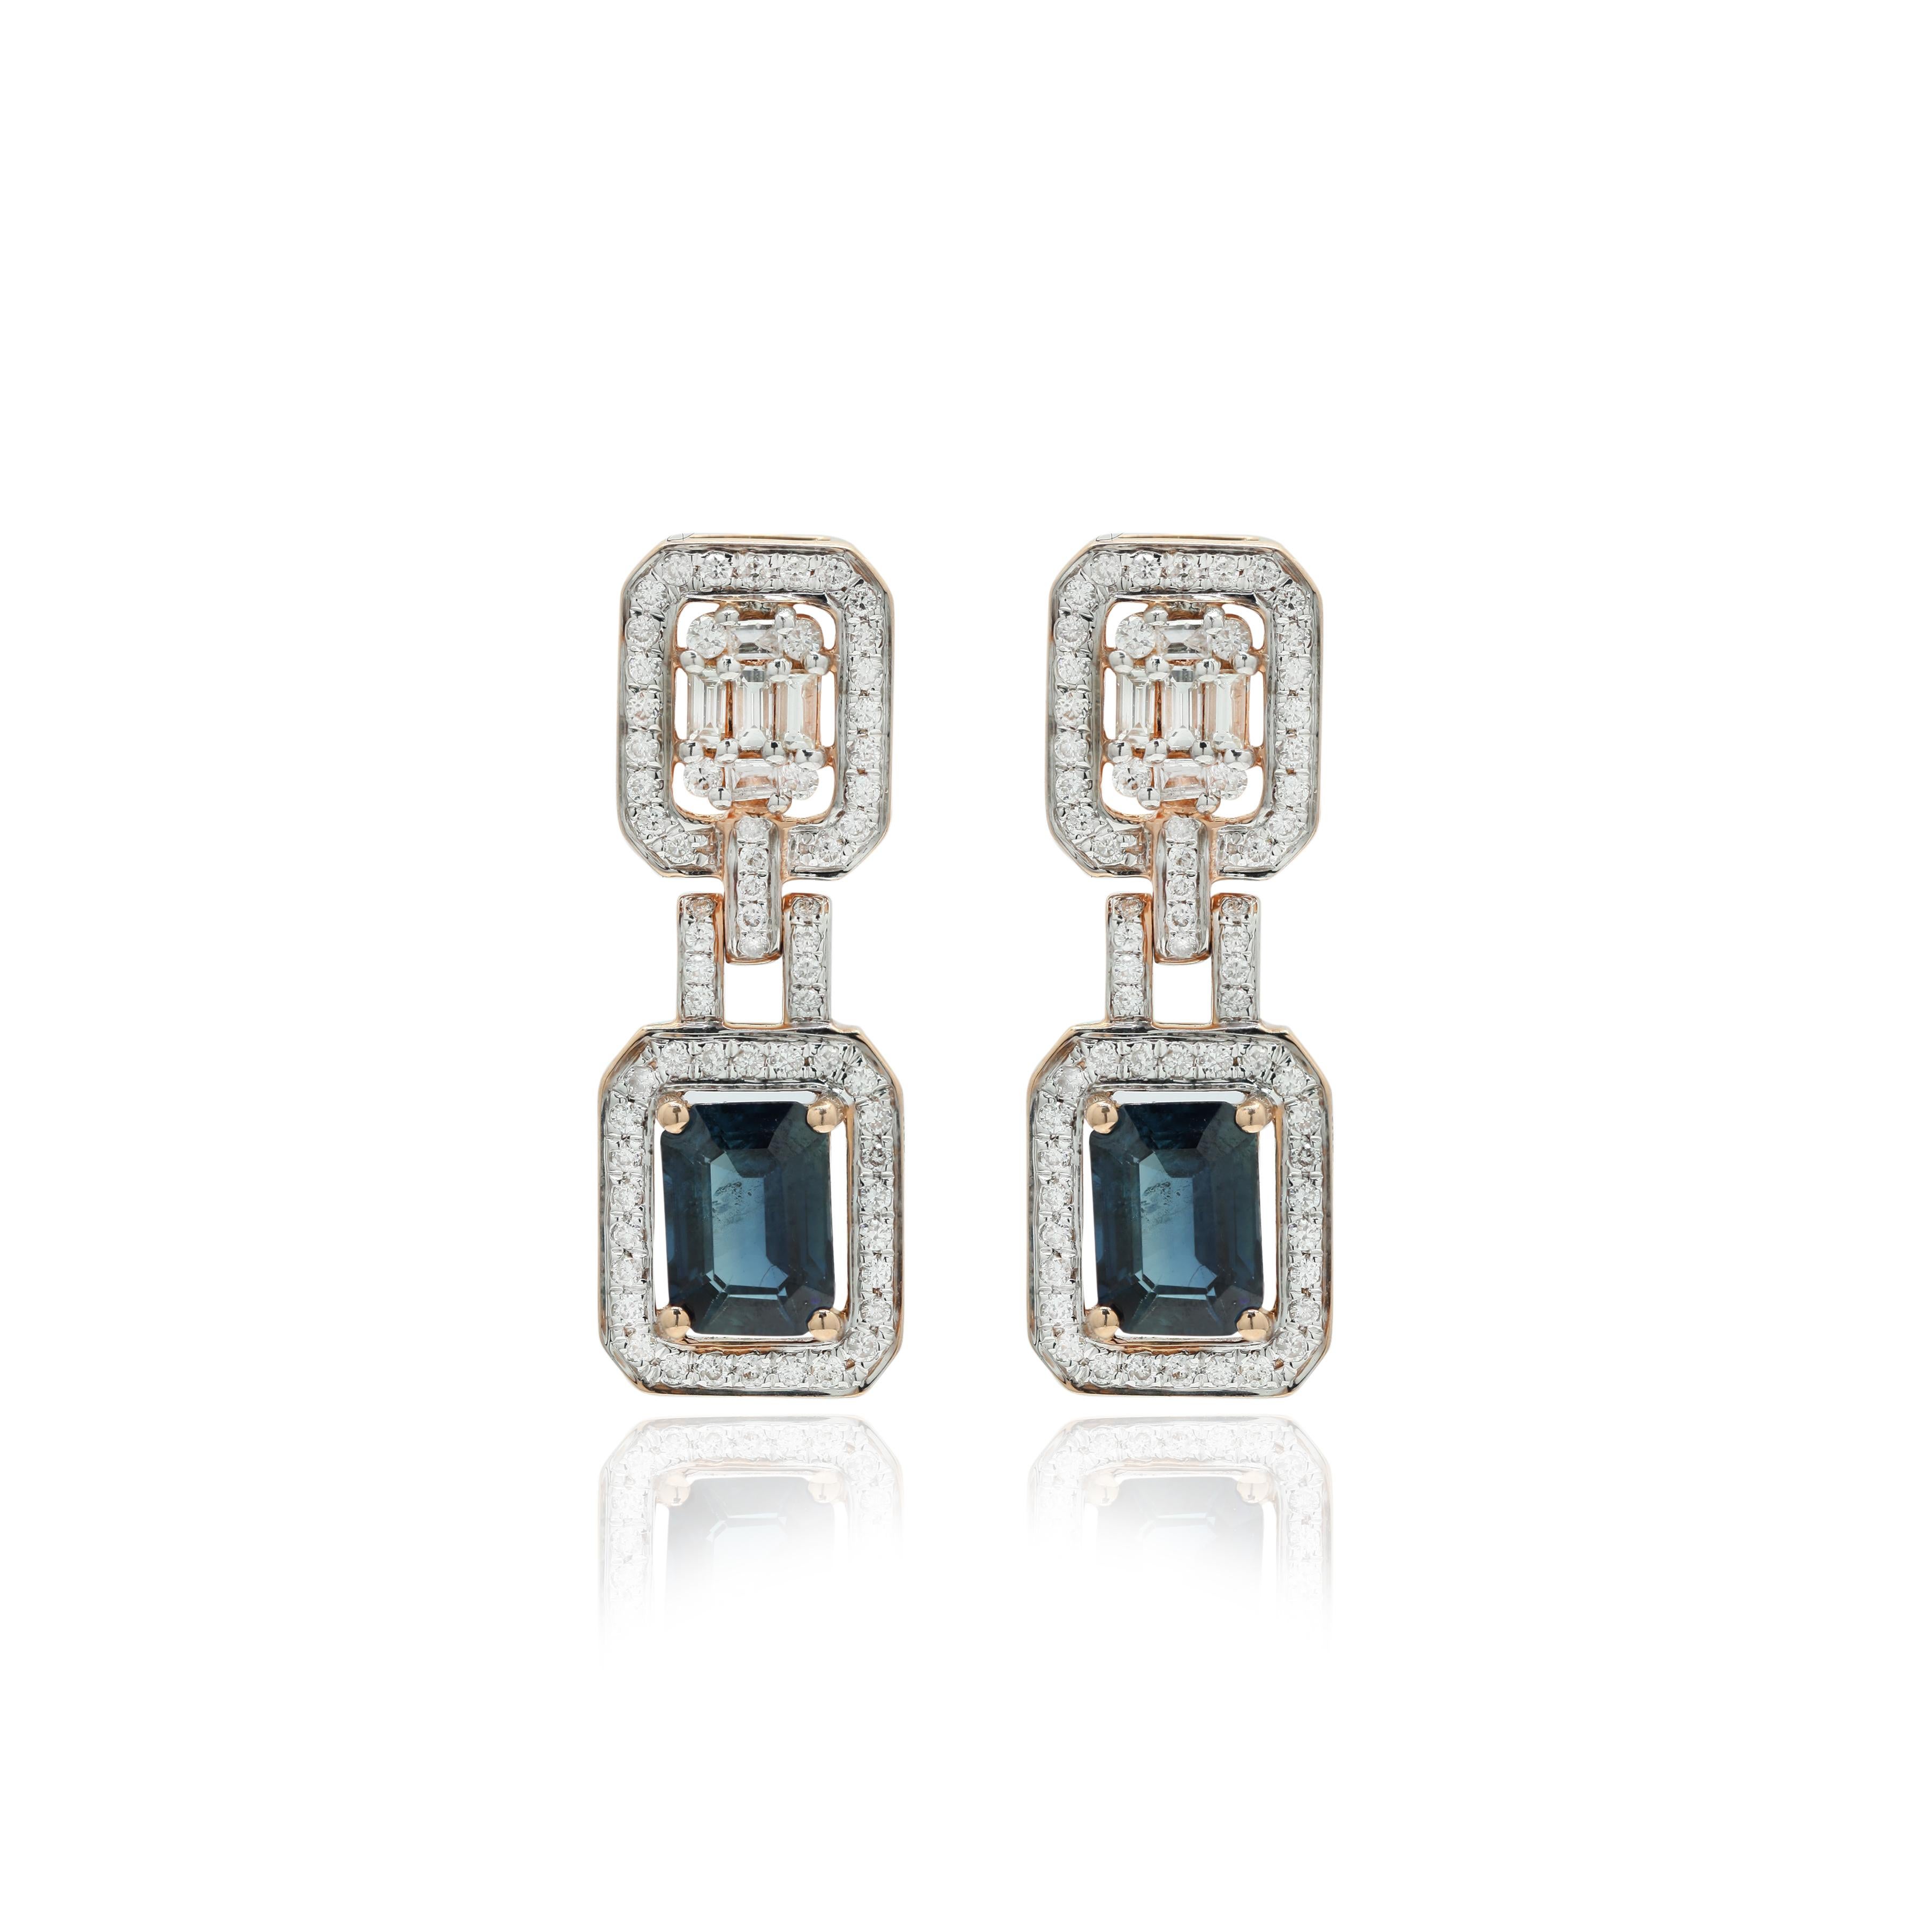 Blue Sapphire and Diamond Dangle Earrings to make a statement with your look. These earrings create a sparkling, luxurious look featuring octagon cut gemstone.
If you love to gravitate towards unique styles, this piece of jewelry is perfect for